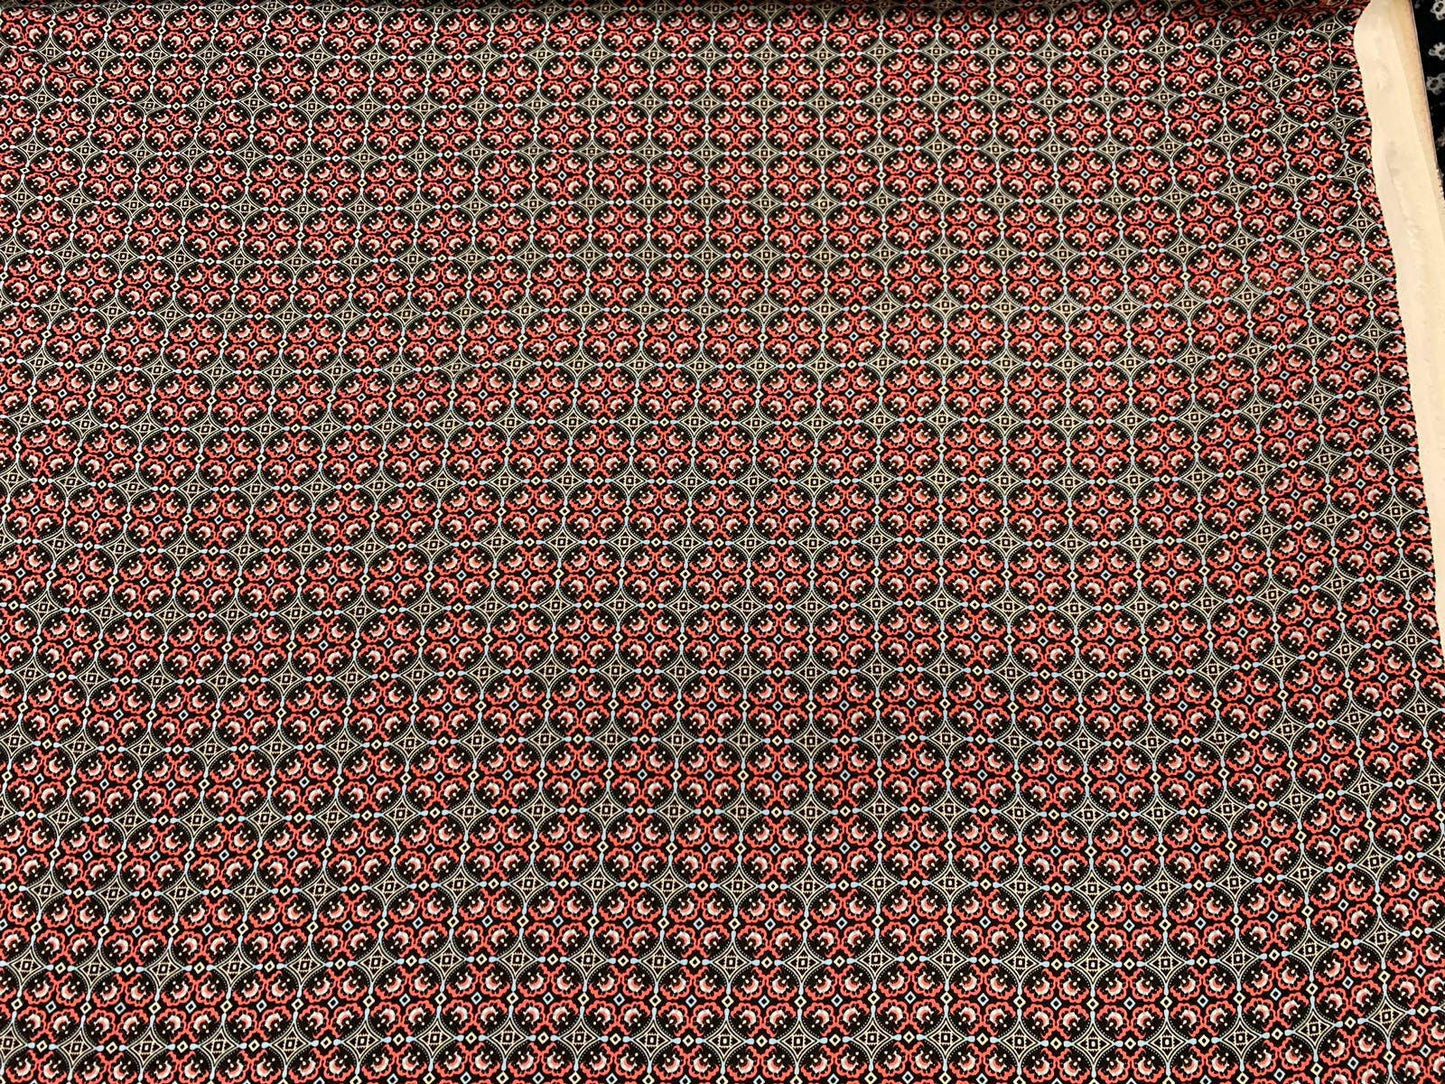 Rayon Challis Asian Inspired Print Fabric by the Yard 58 Inches Wide red black geometric  soft flowy organic kids dress draping clothing